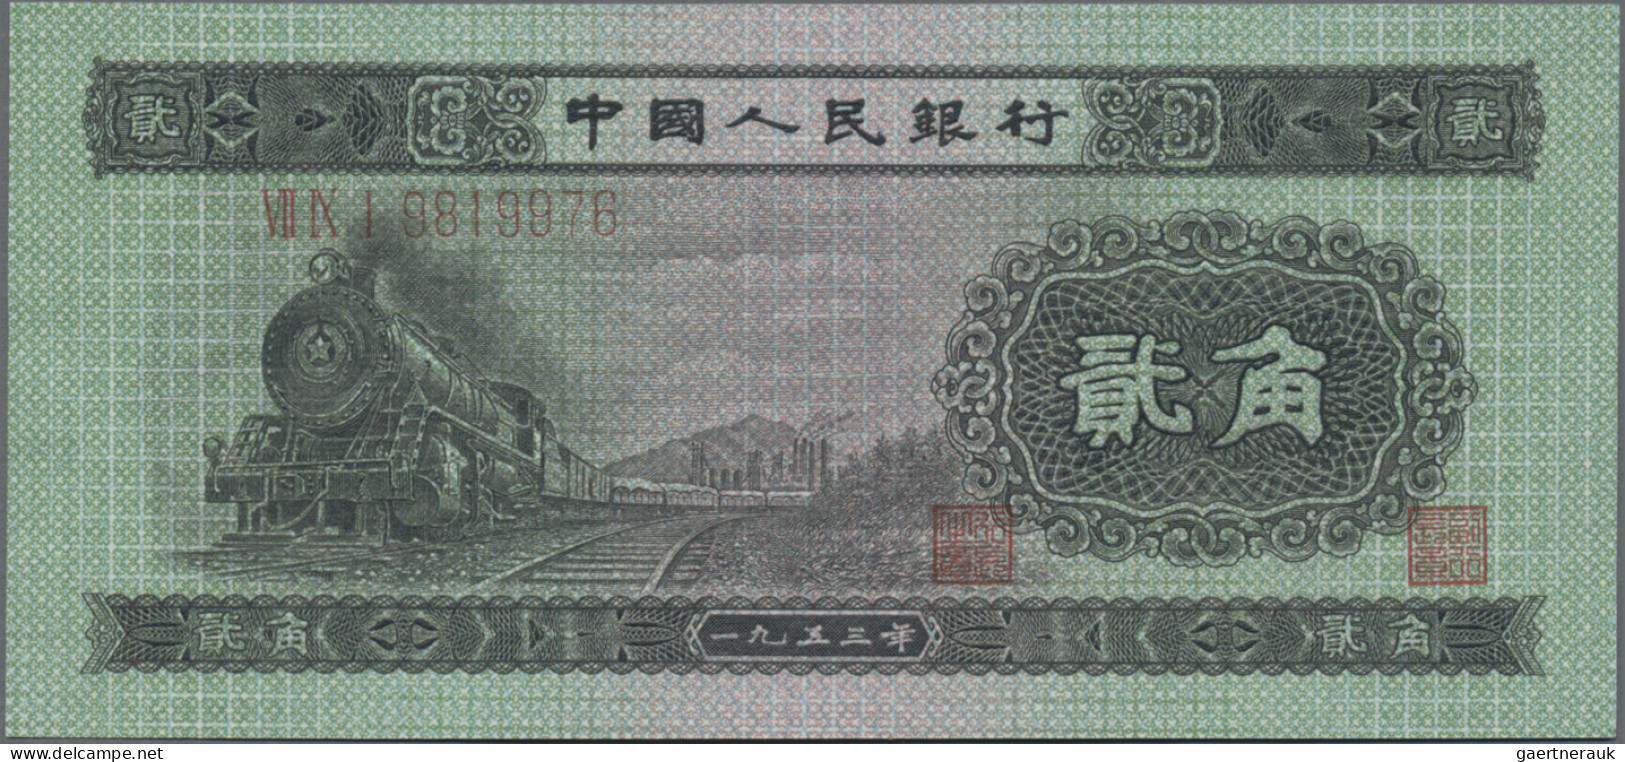 China: Peoples Republic Of China 1953 Second Series Set With 4 Banknotes Compris - China